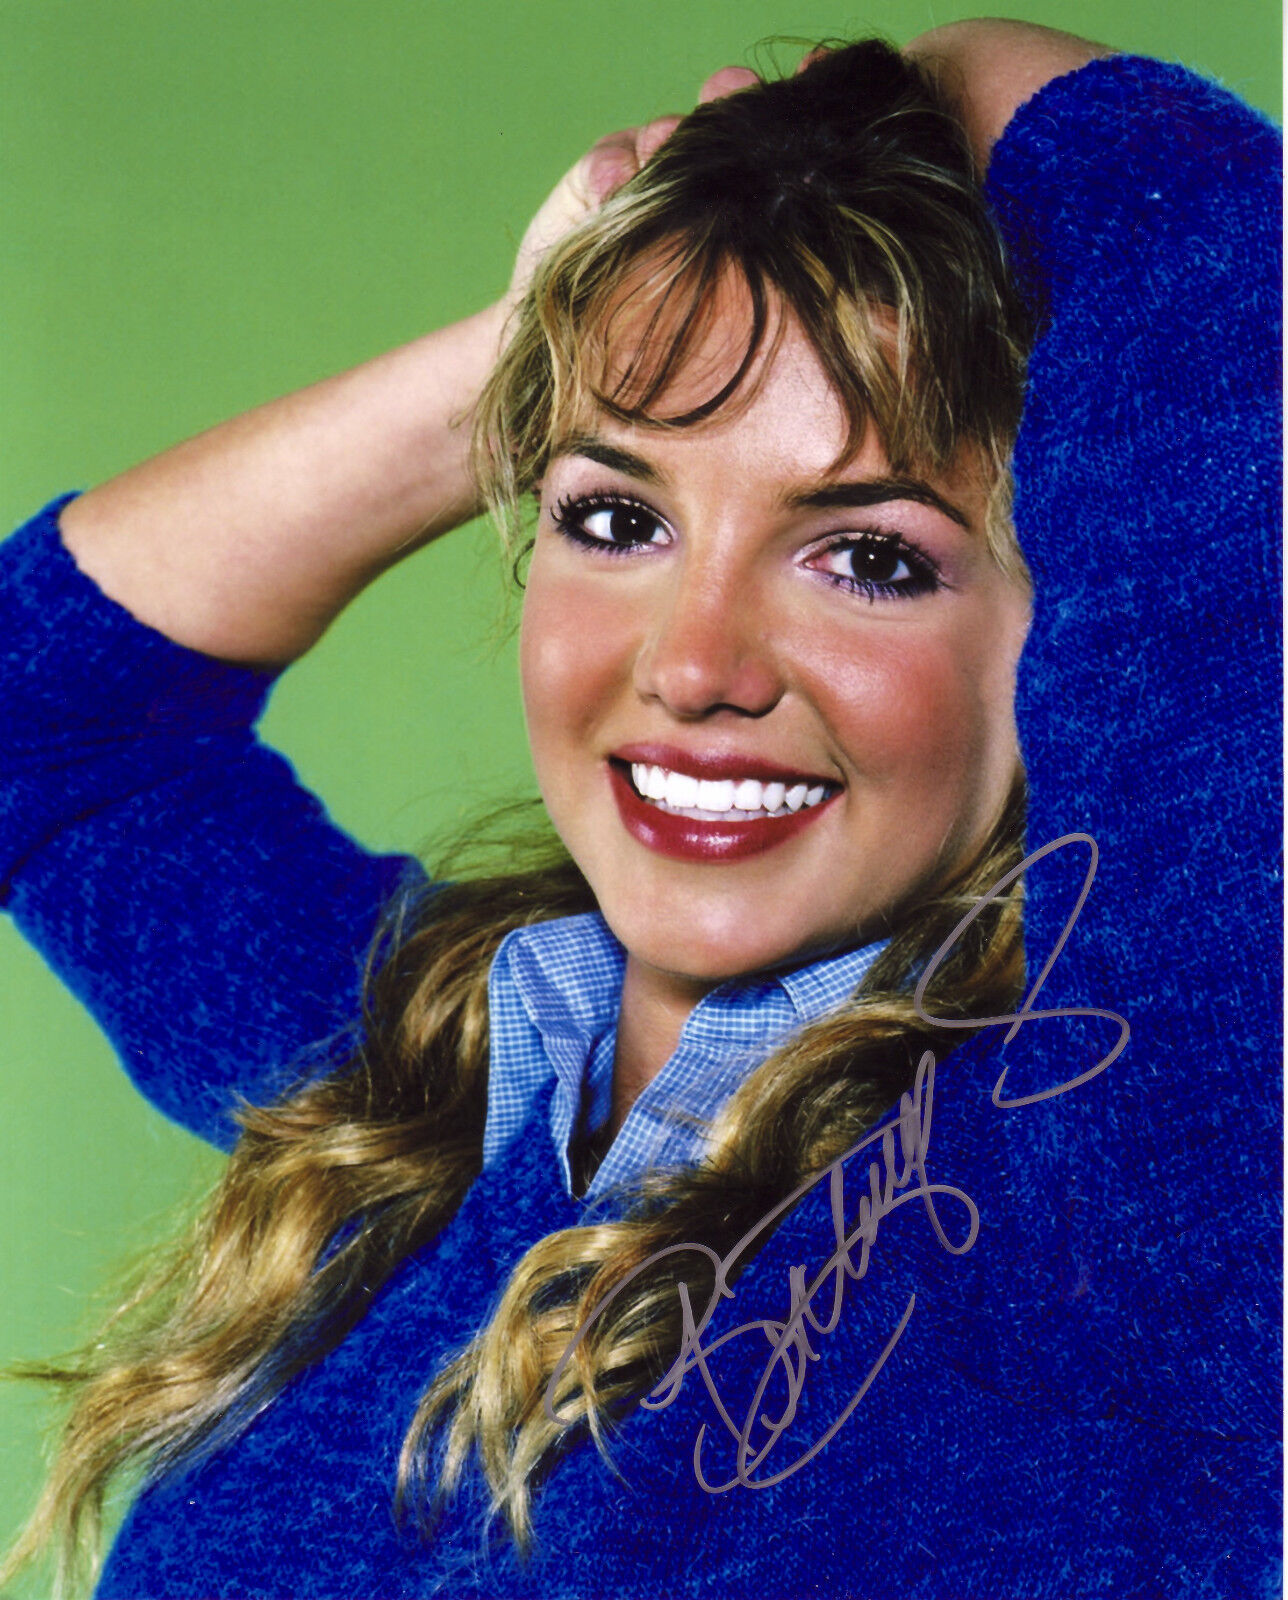 BRITNEY SPEARS AUTOGRAPH SIGNED PP Photo Poster painting POSTER 42